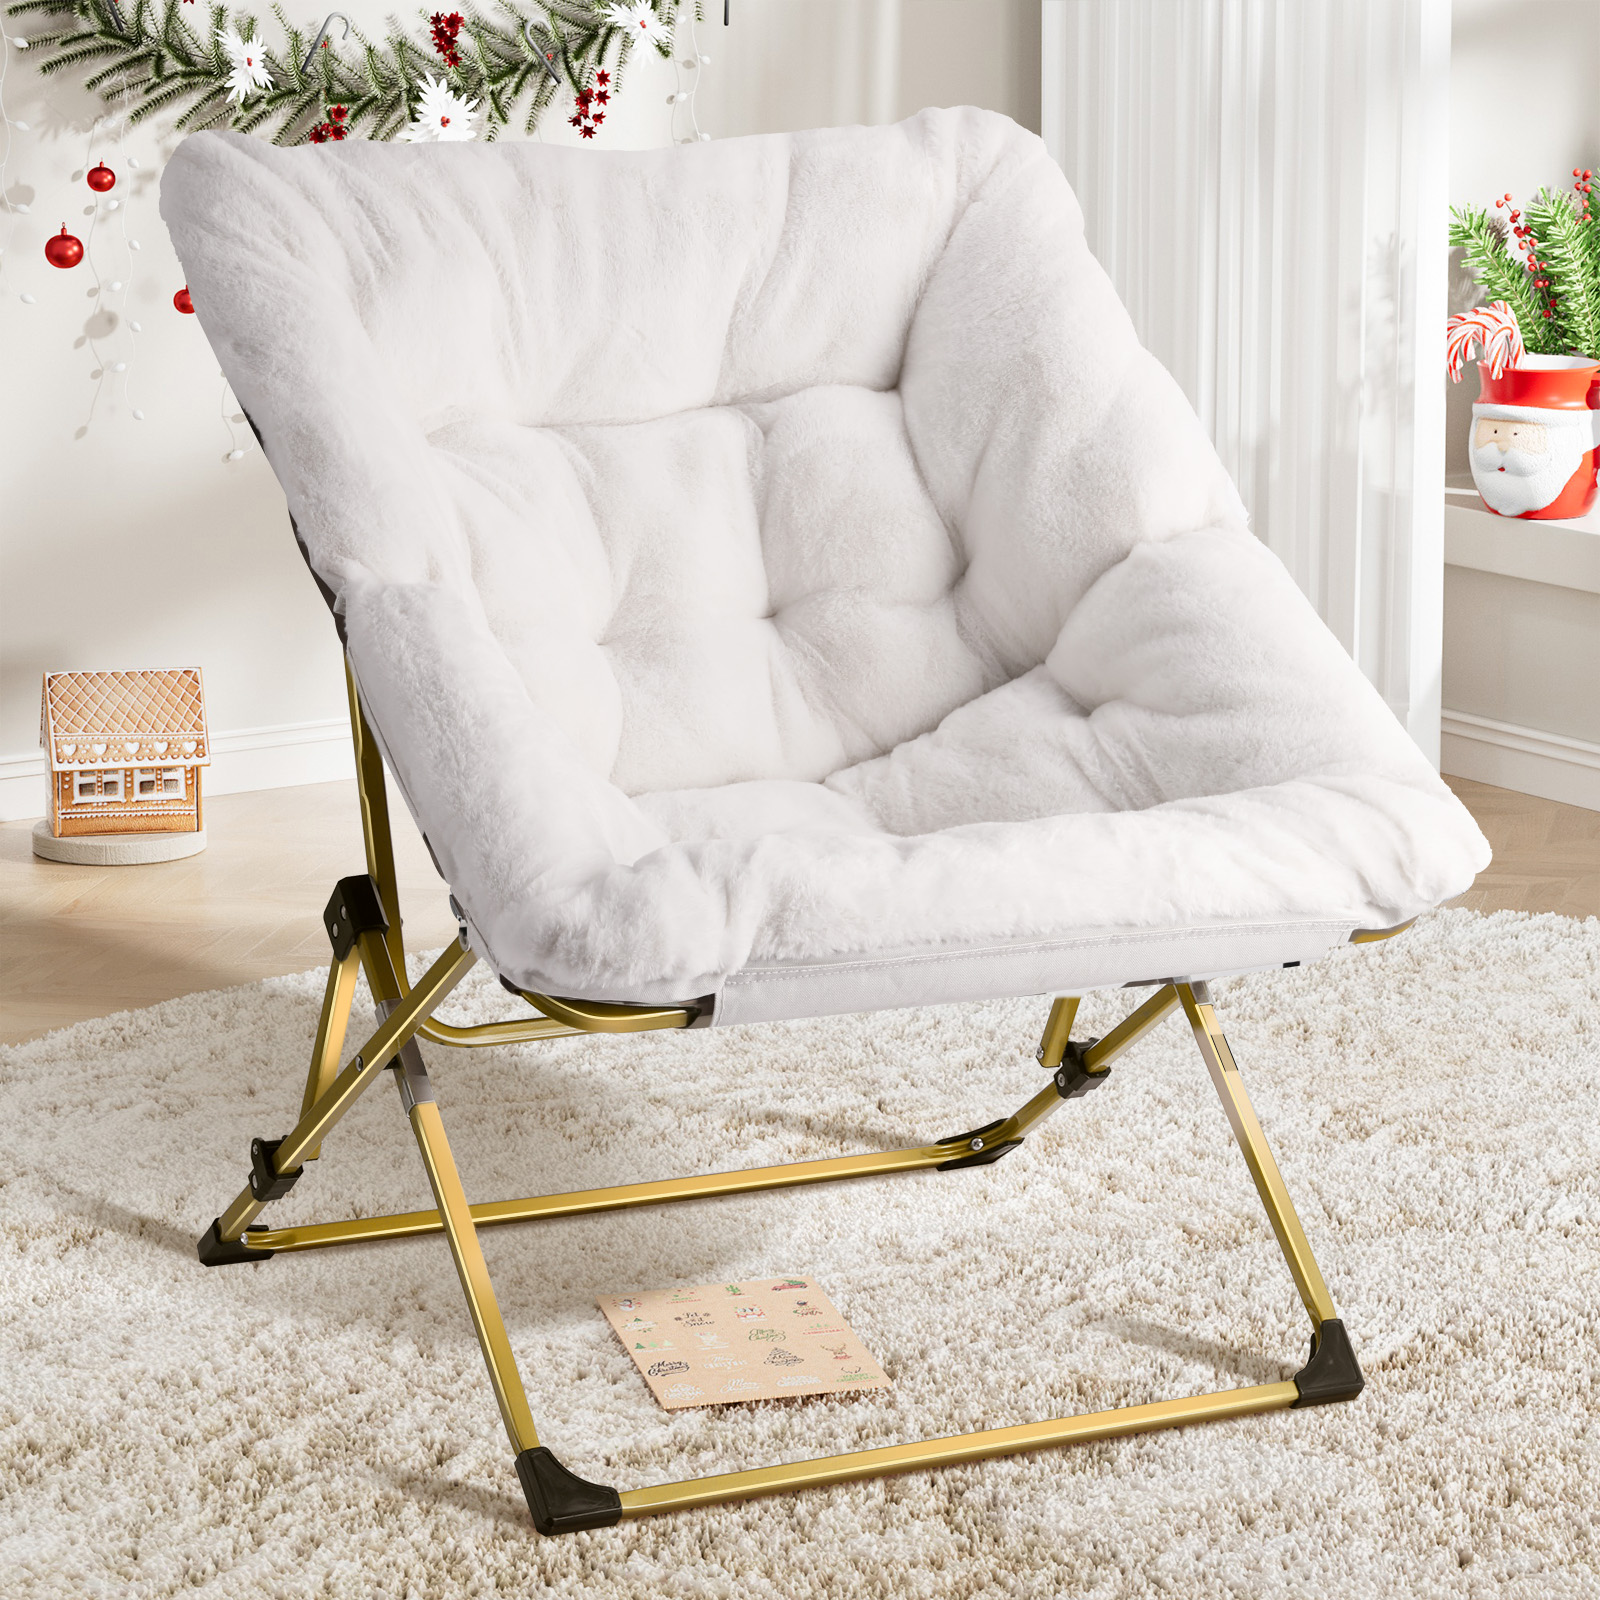 GIKPAL Saucer Chair, Comfy Bedroom Chairs, Oversized Folding Faux Fur Chair for Living Room, Balcony and Study, Flexible Seating Chair for Kids Teens Adults, White - image 1 of 8